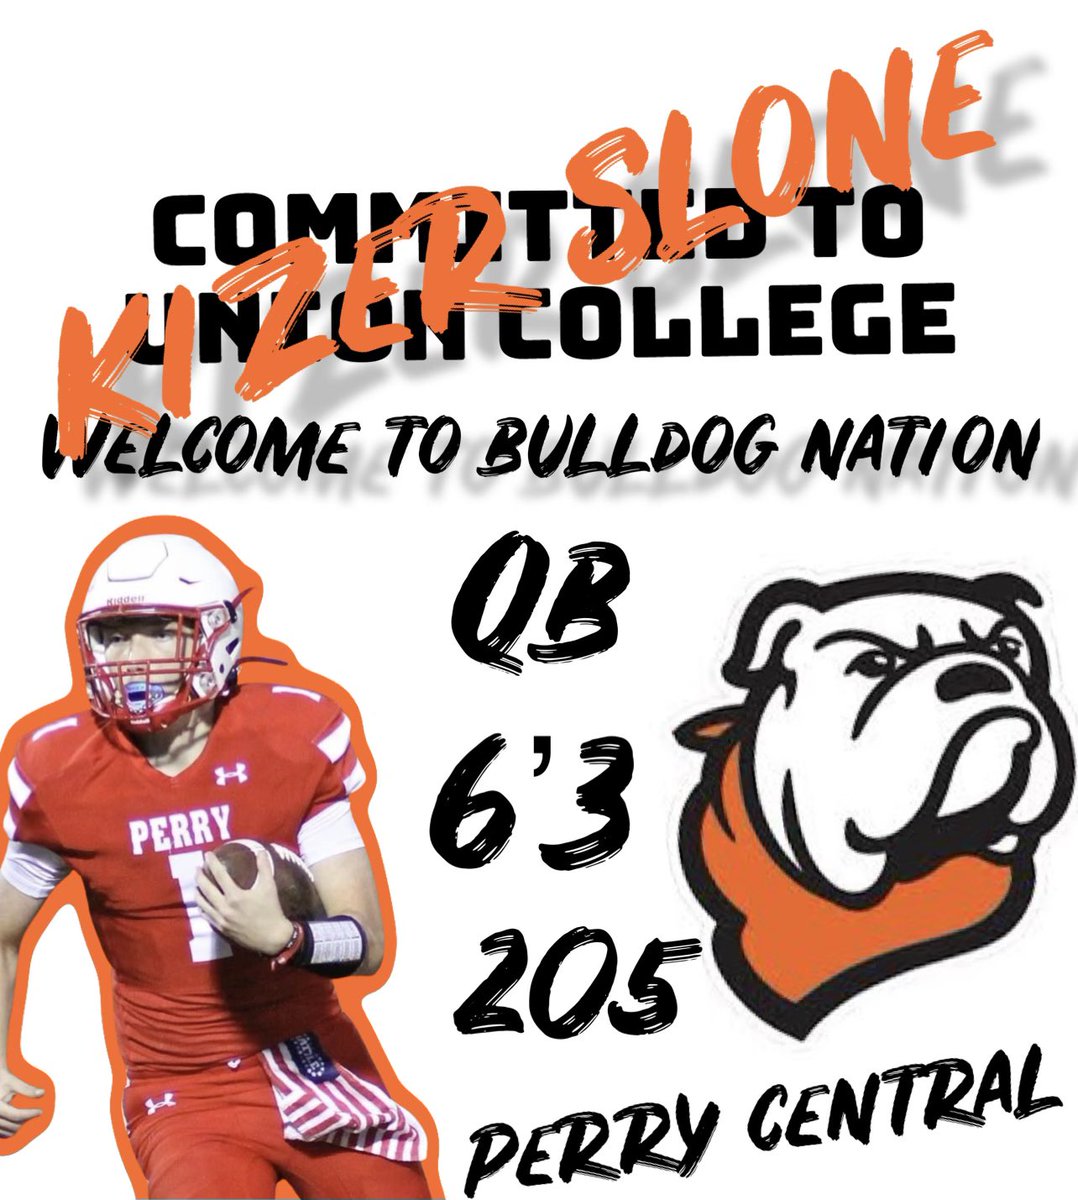 Excited to announce I’ll be furthering my athletic and academic career at Union College! Go Bulldogs!! @CoachDayUC @CoachLuttrell49 @CoachDonahue64 @PrepRedzoneKY @KPGfootball